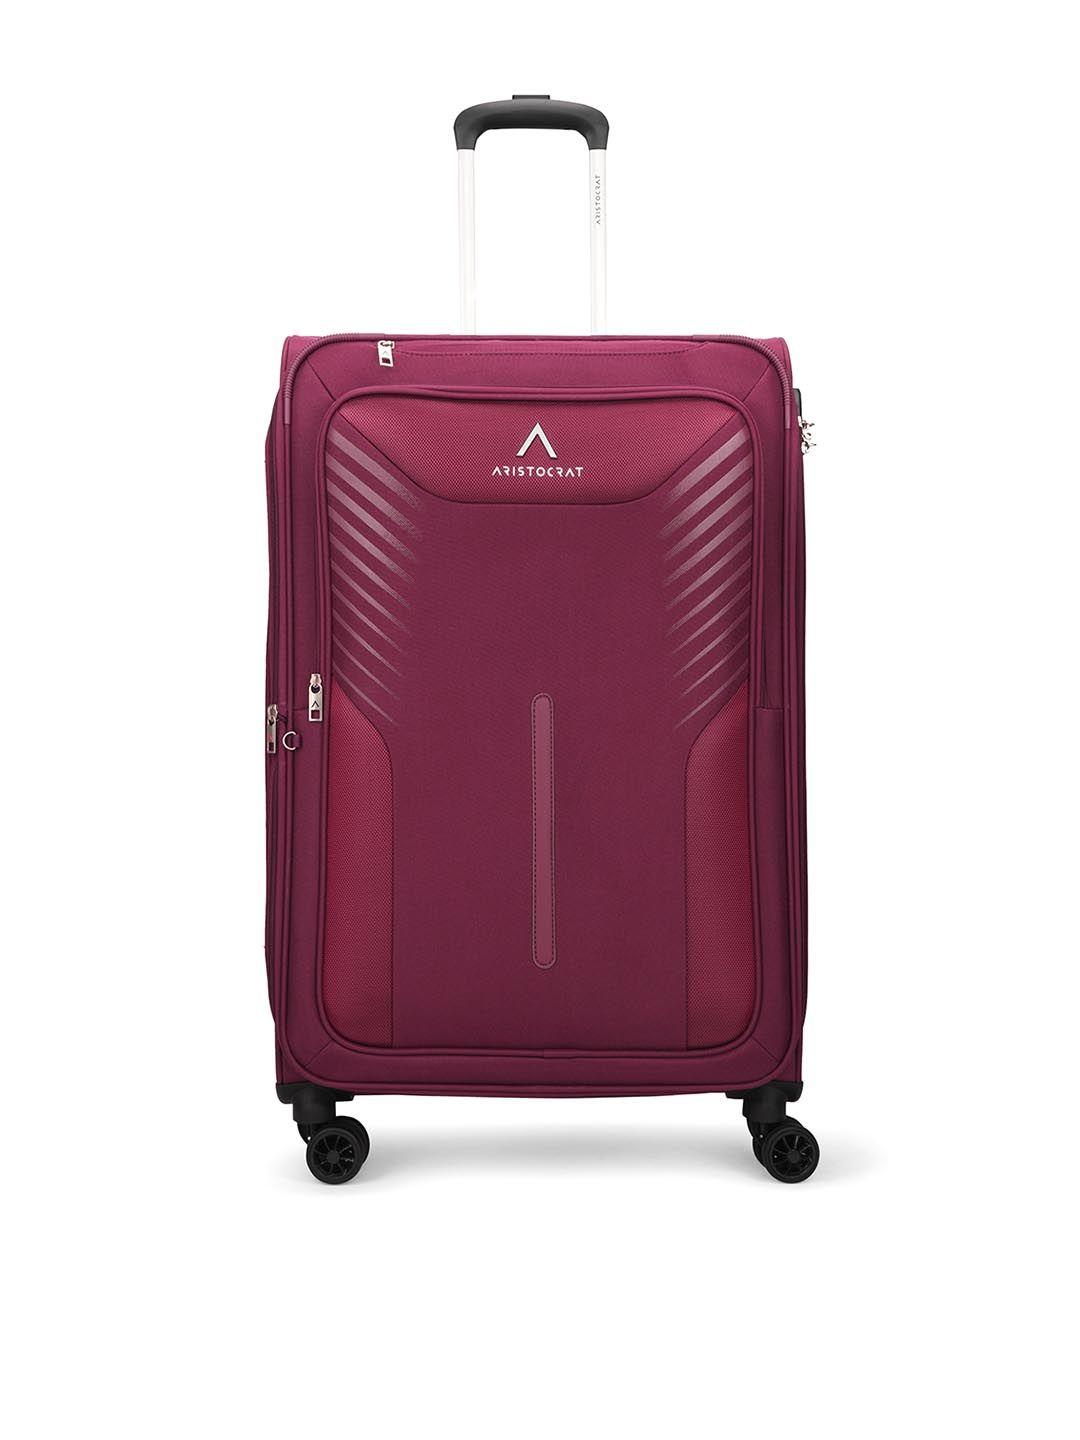 aristocrat textured soft-sided trolley suitcases